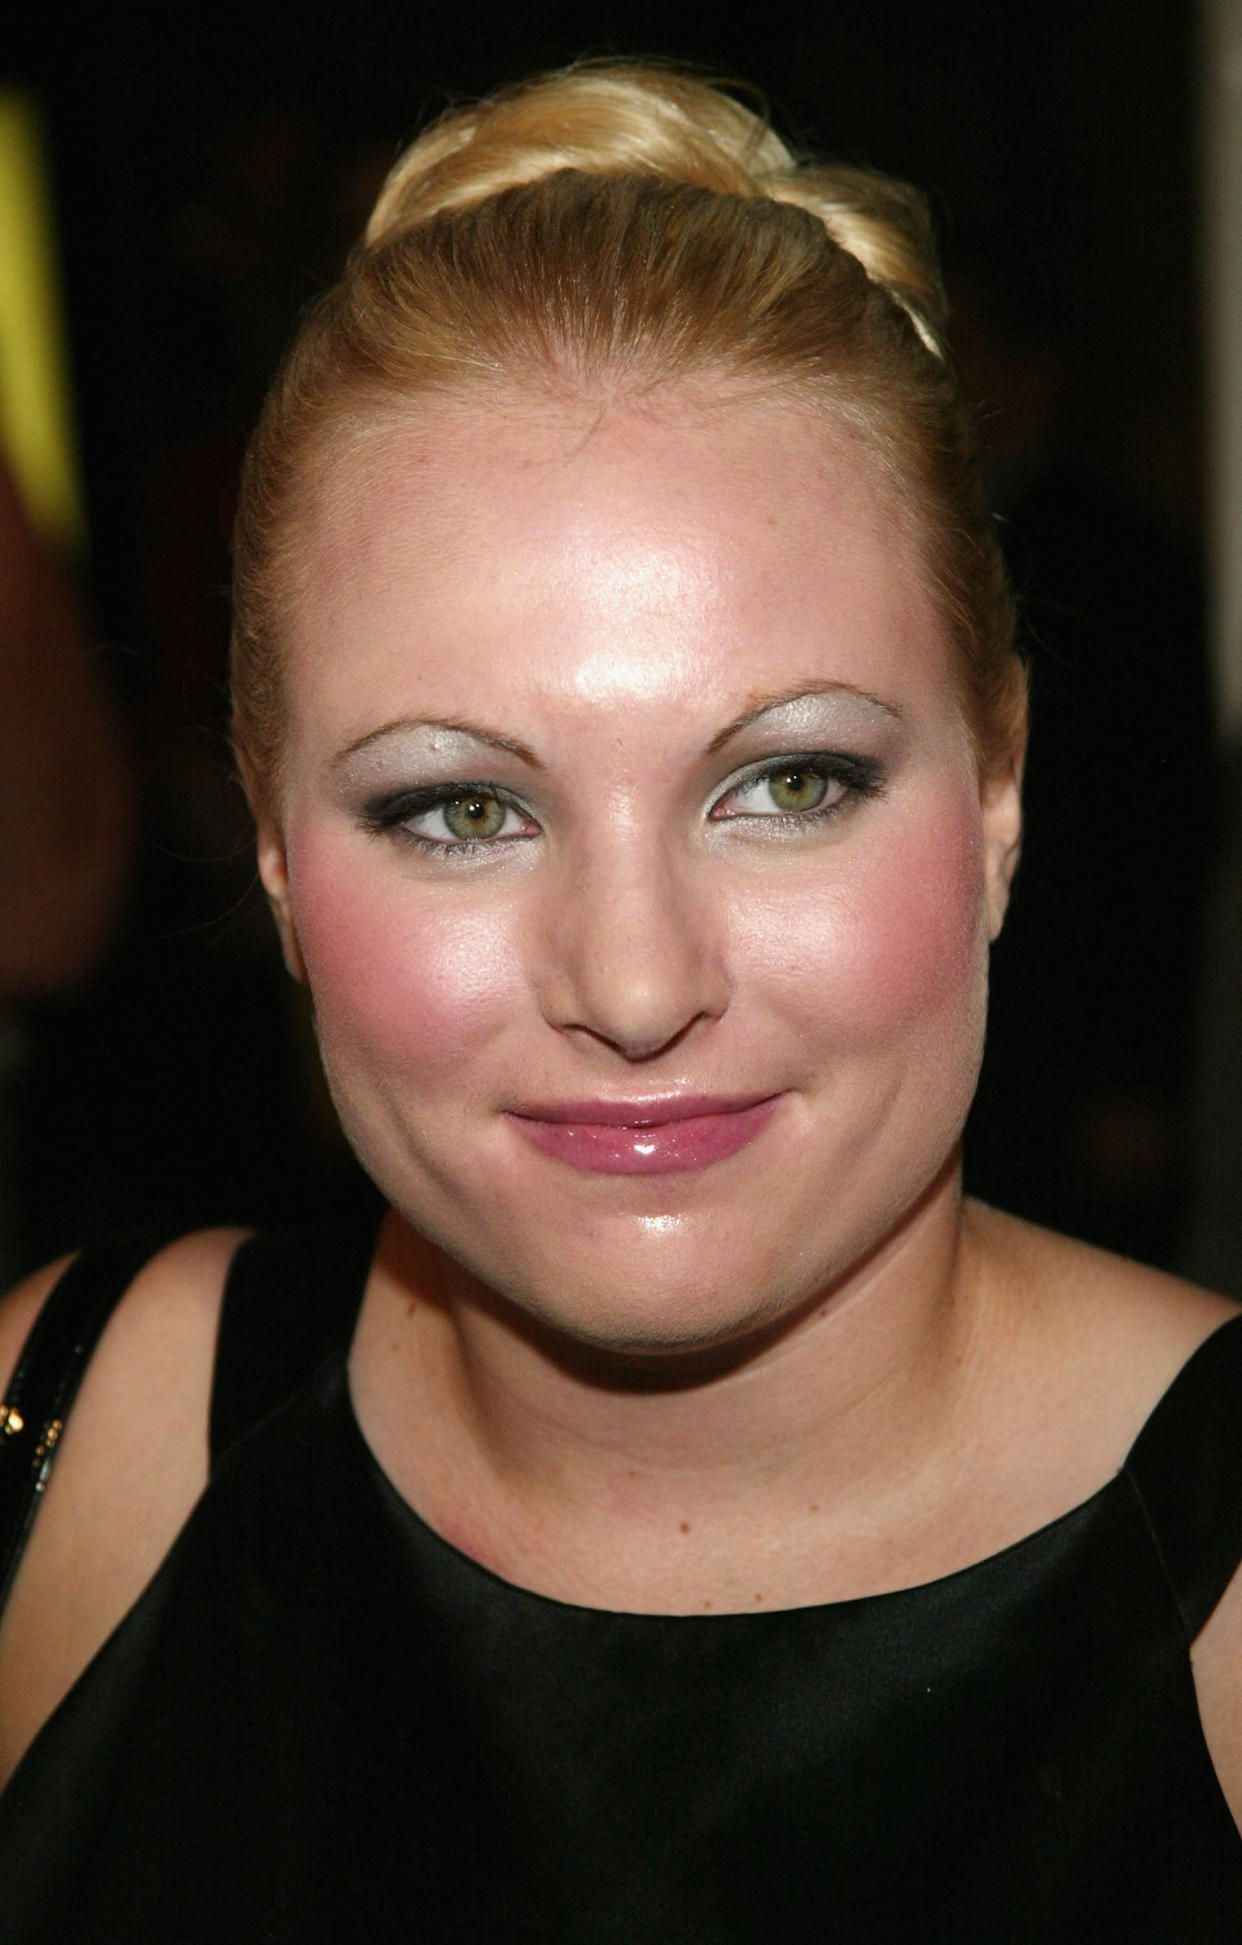 NEW YORK - SEPTEMBER 1:  Megan McCain attends the 'Live From New York Its Wednesday Night' on September 1, 2004 at Cipriani's 42nd Street, in New York City. (Photo by Evan Agostini/Getty Images)